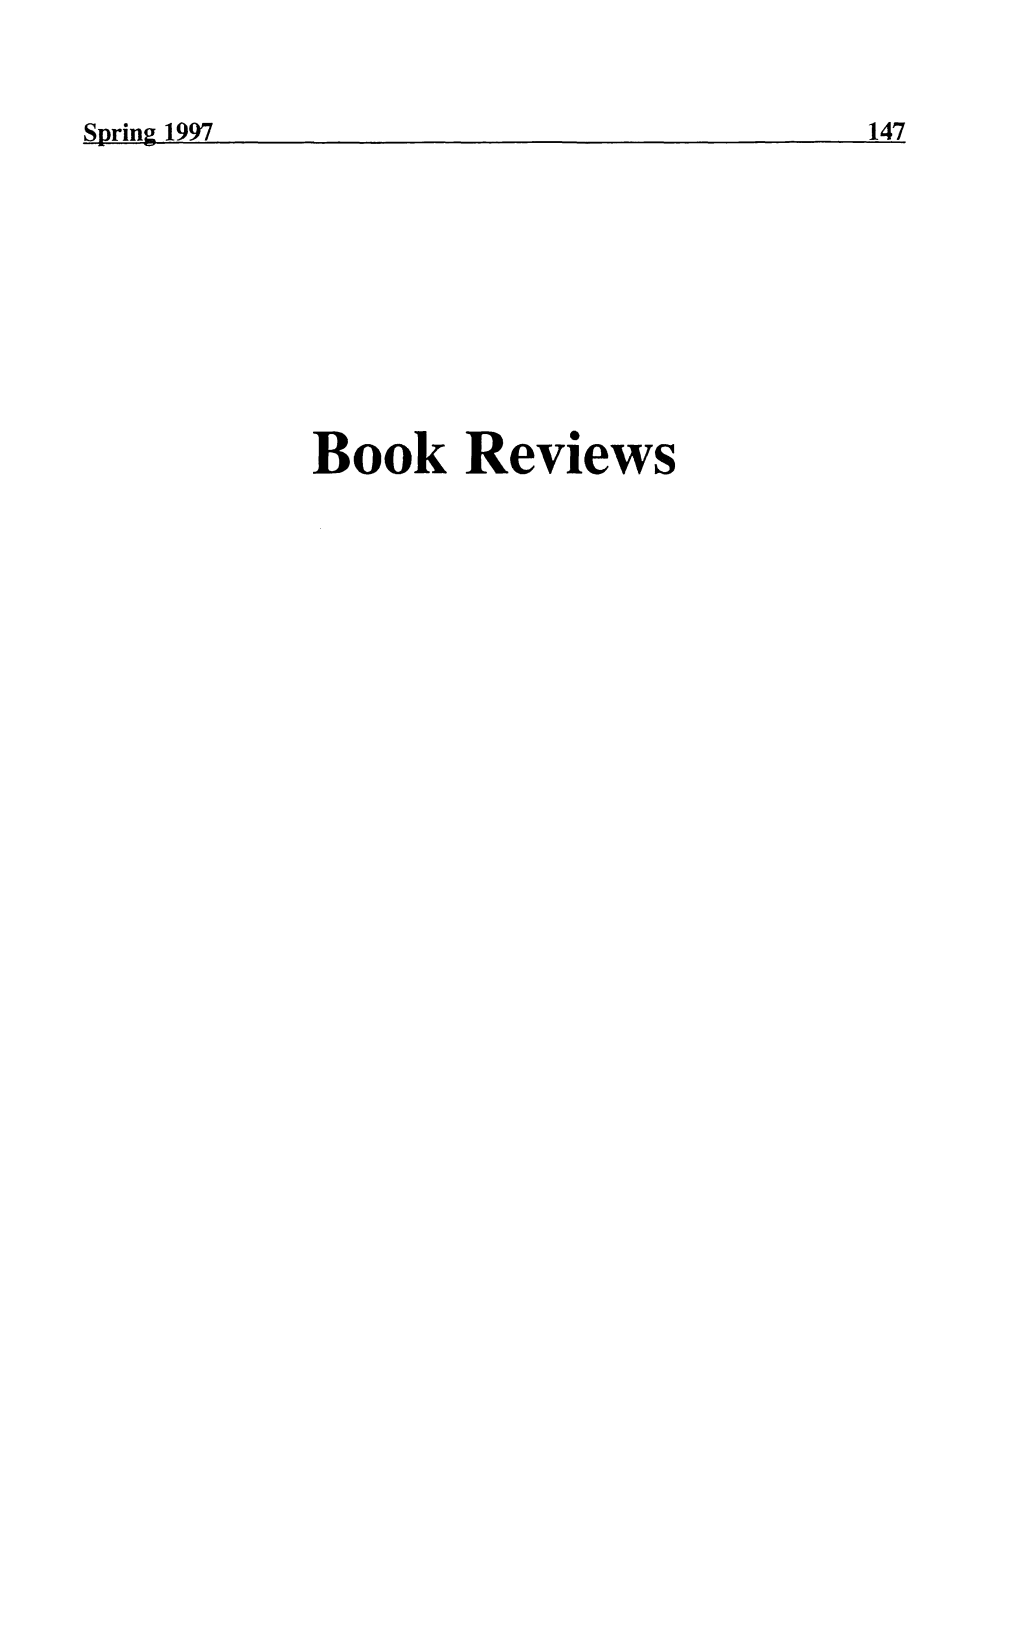 Book Reviews 148 Journal of Dramatic Theory and Criticism Spring 1997 149